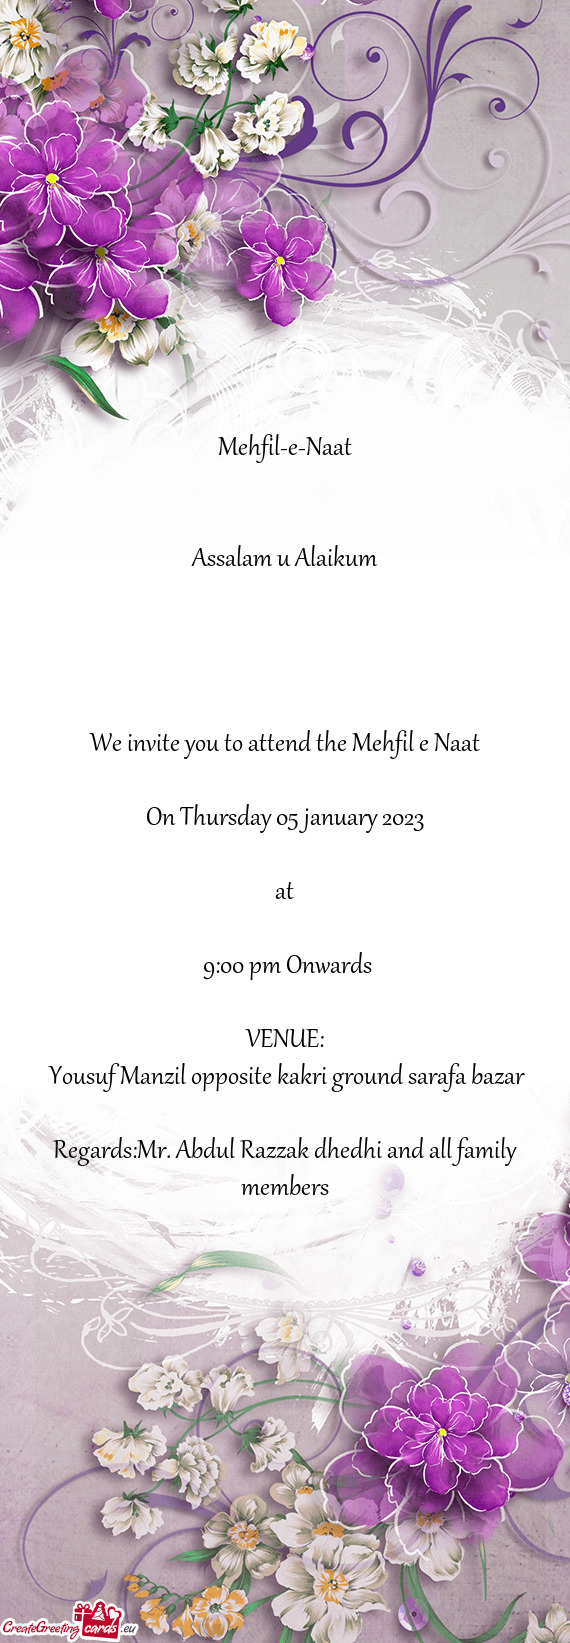 We invite you to attend the Mehfil e Naat